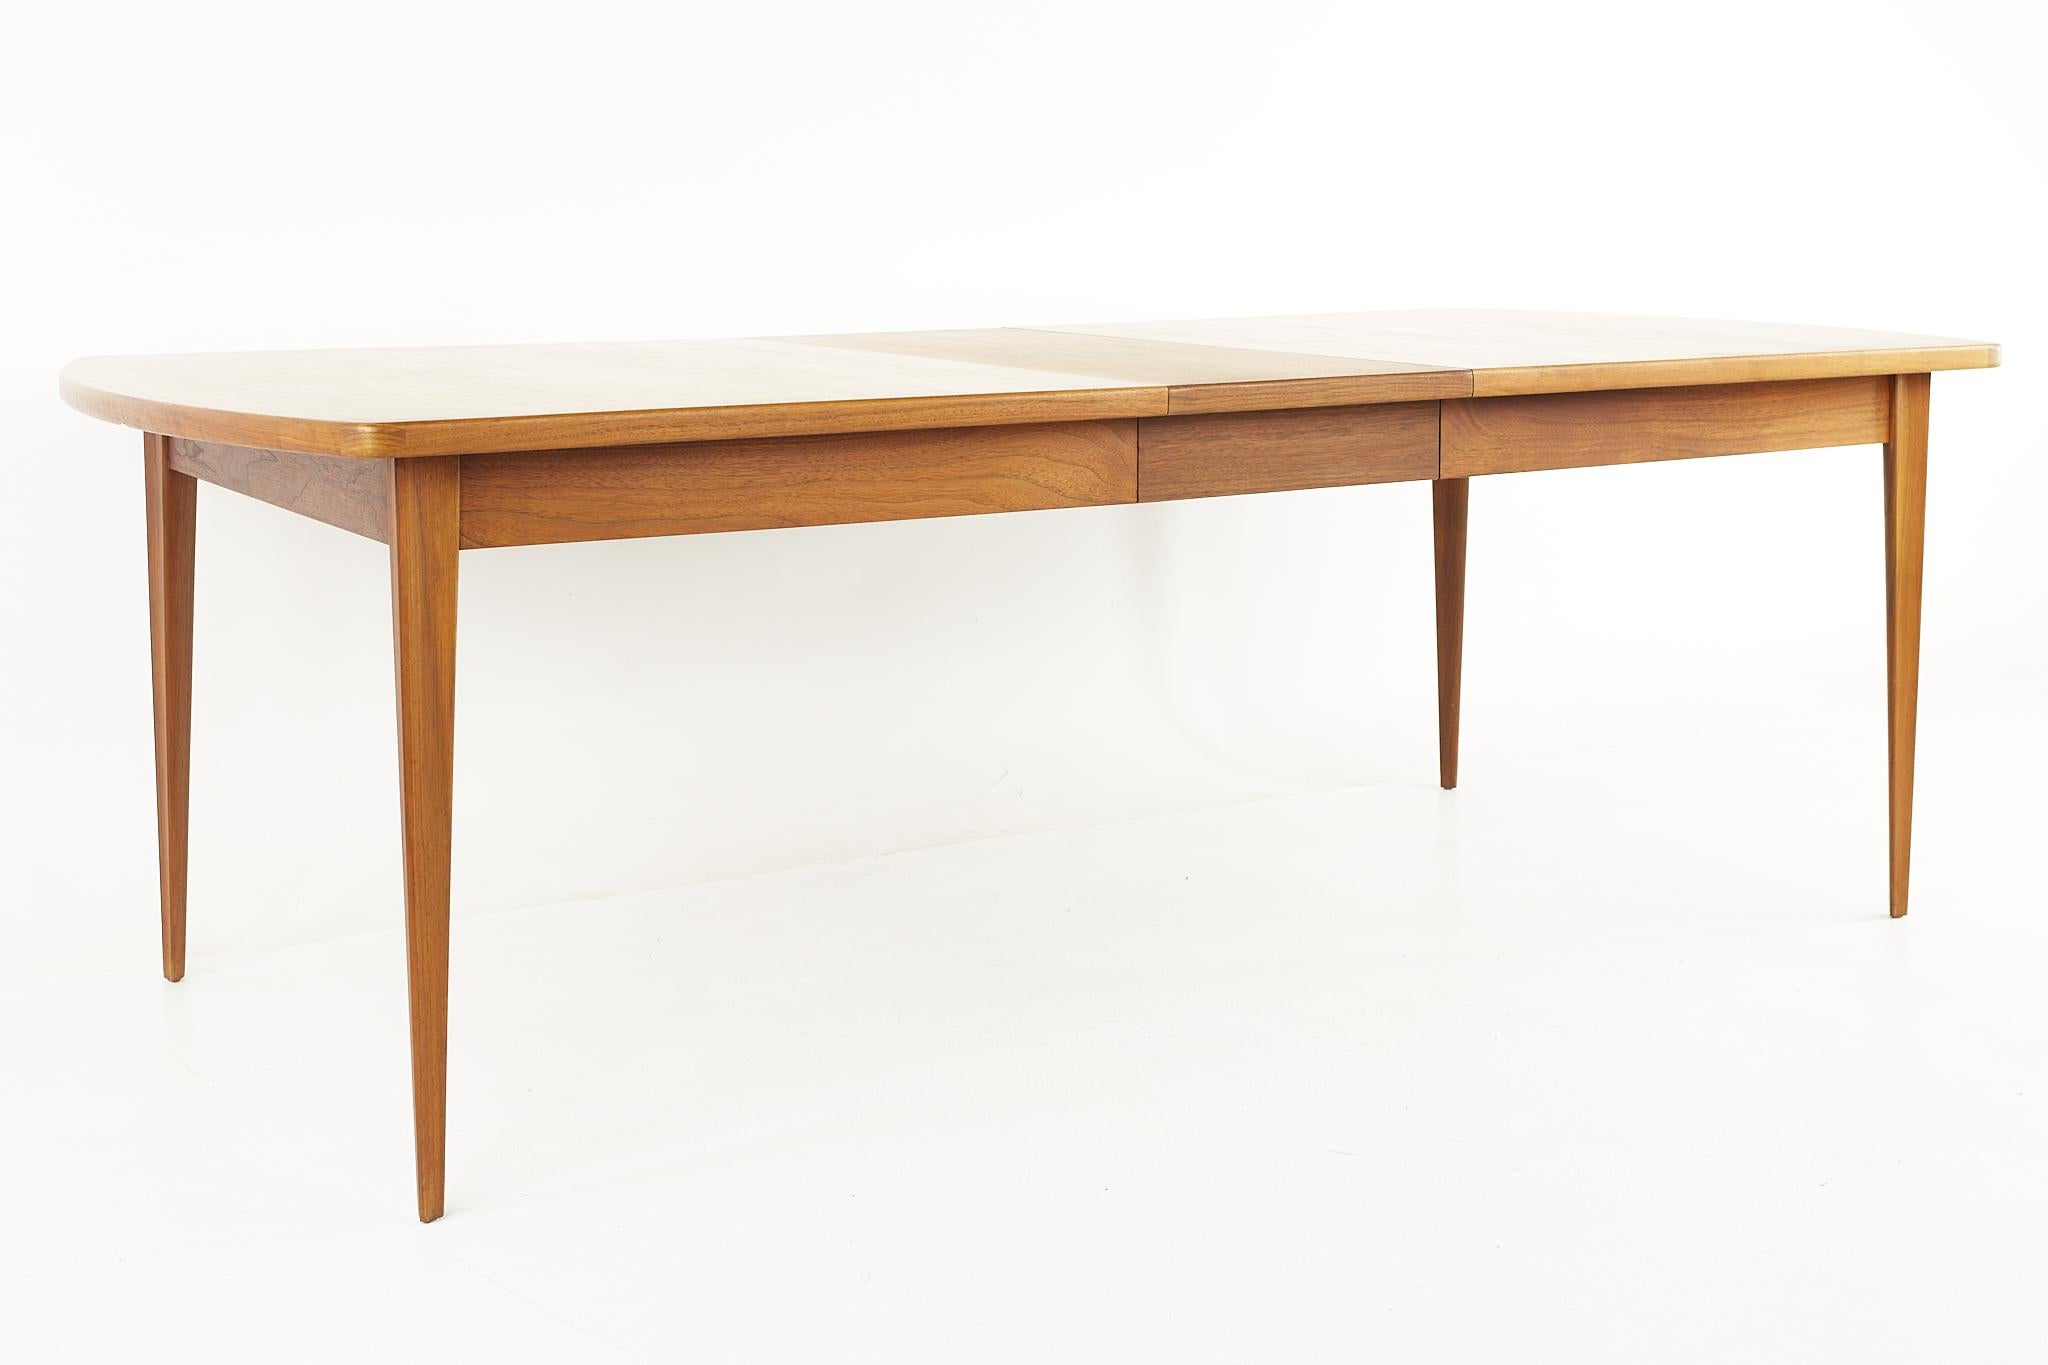 Late 20th Century Bertha Schaefer for Singer and Sons Mid Century Walnut Expanding Dining Table